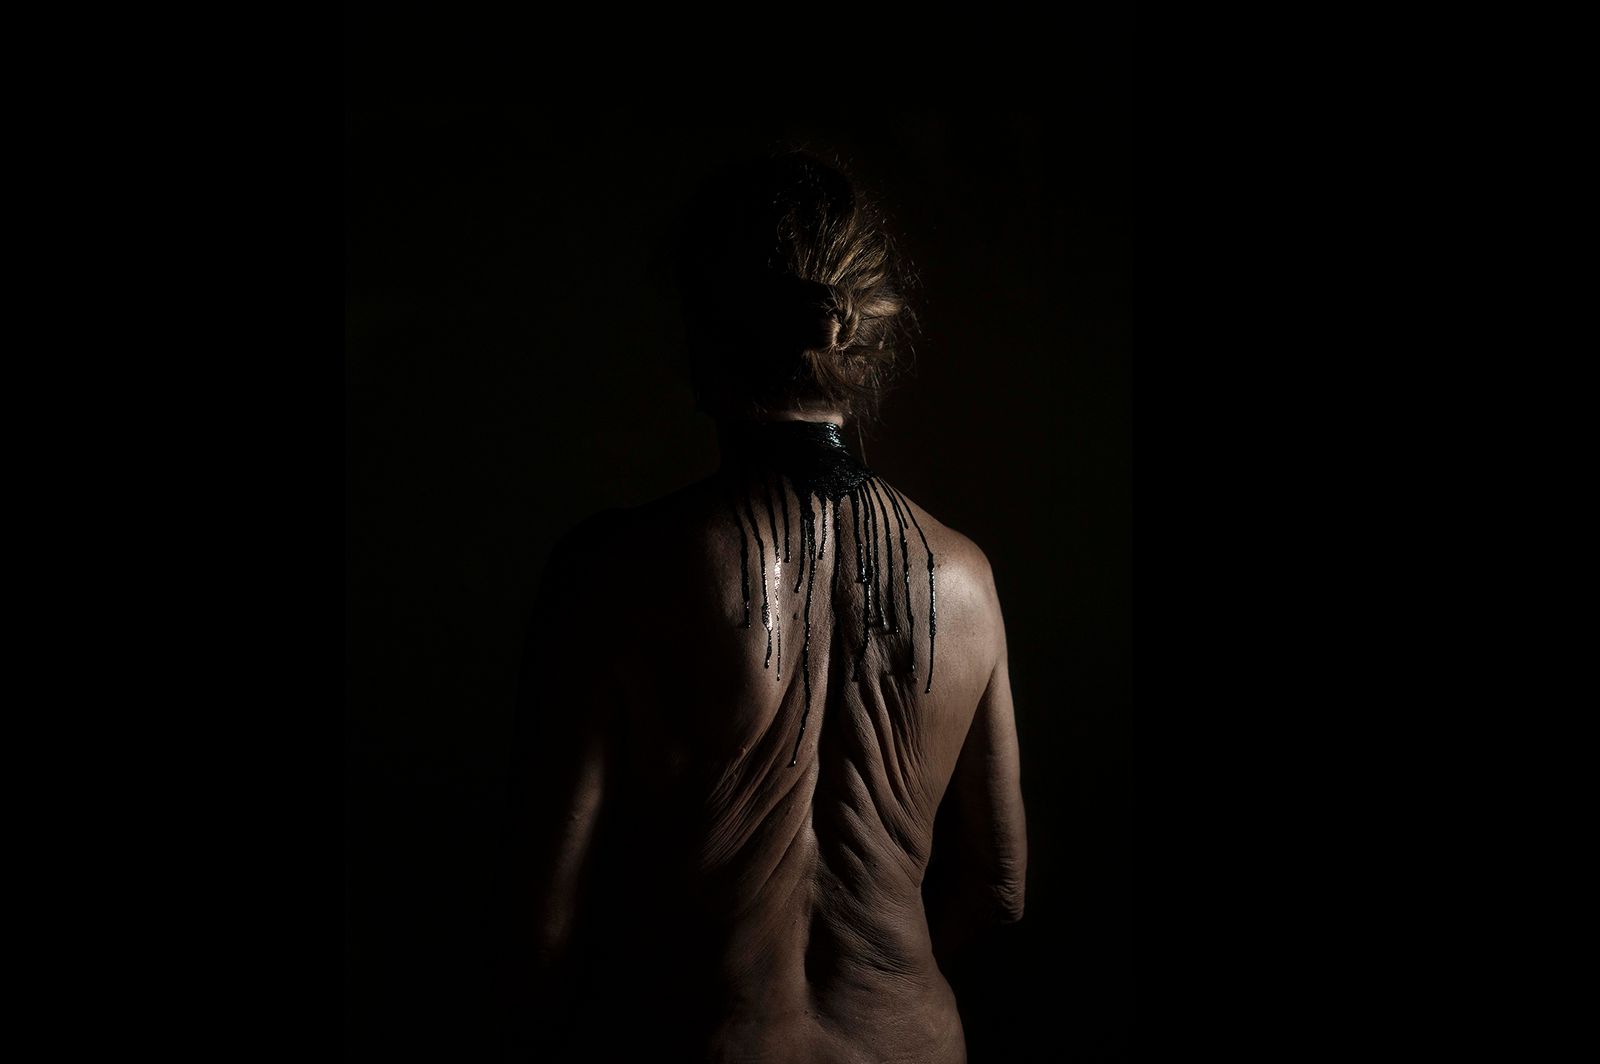 © Alexandra Dewez - Image from the Next of Skin photography project